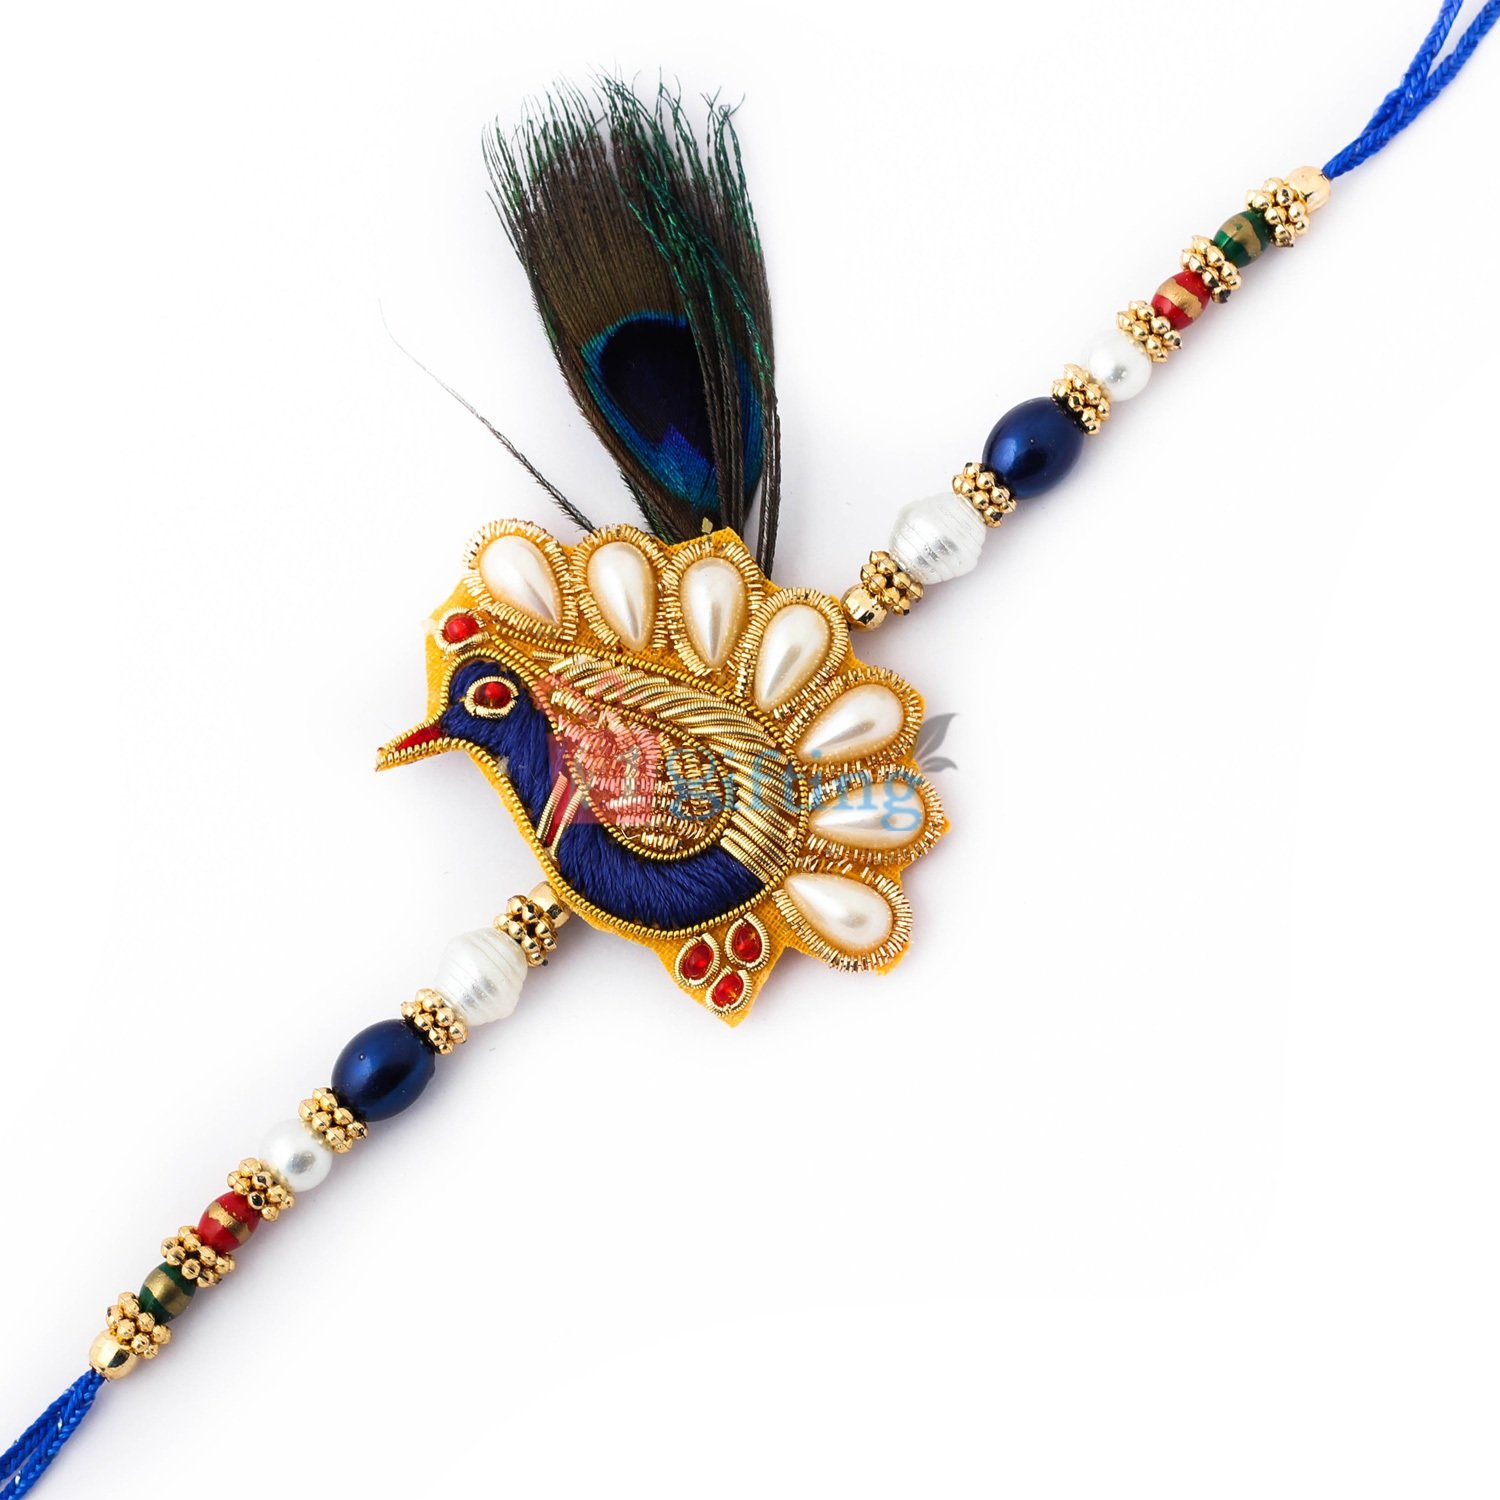 Newly peacock designed Rakhi with pearl and beads